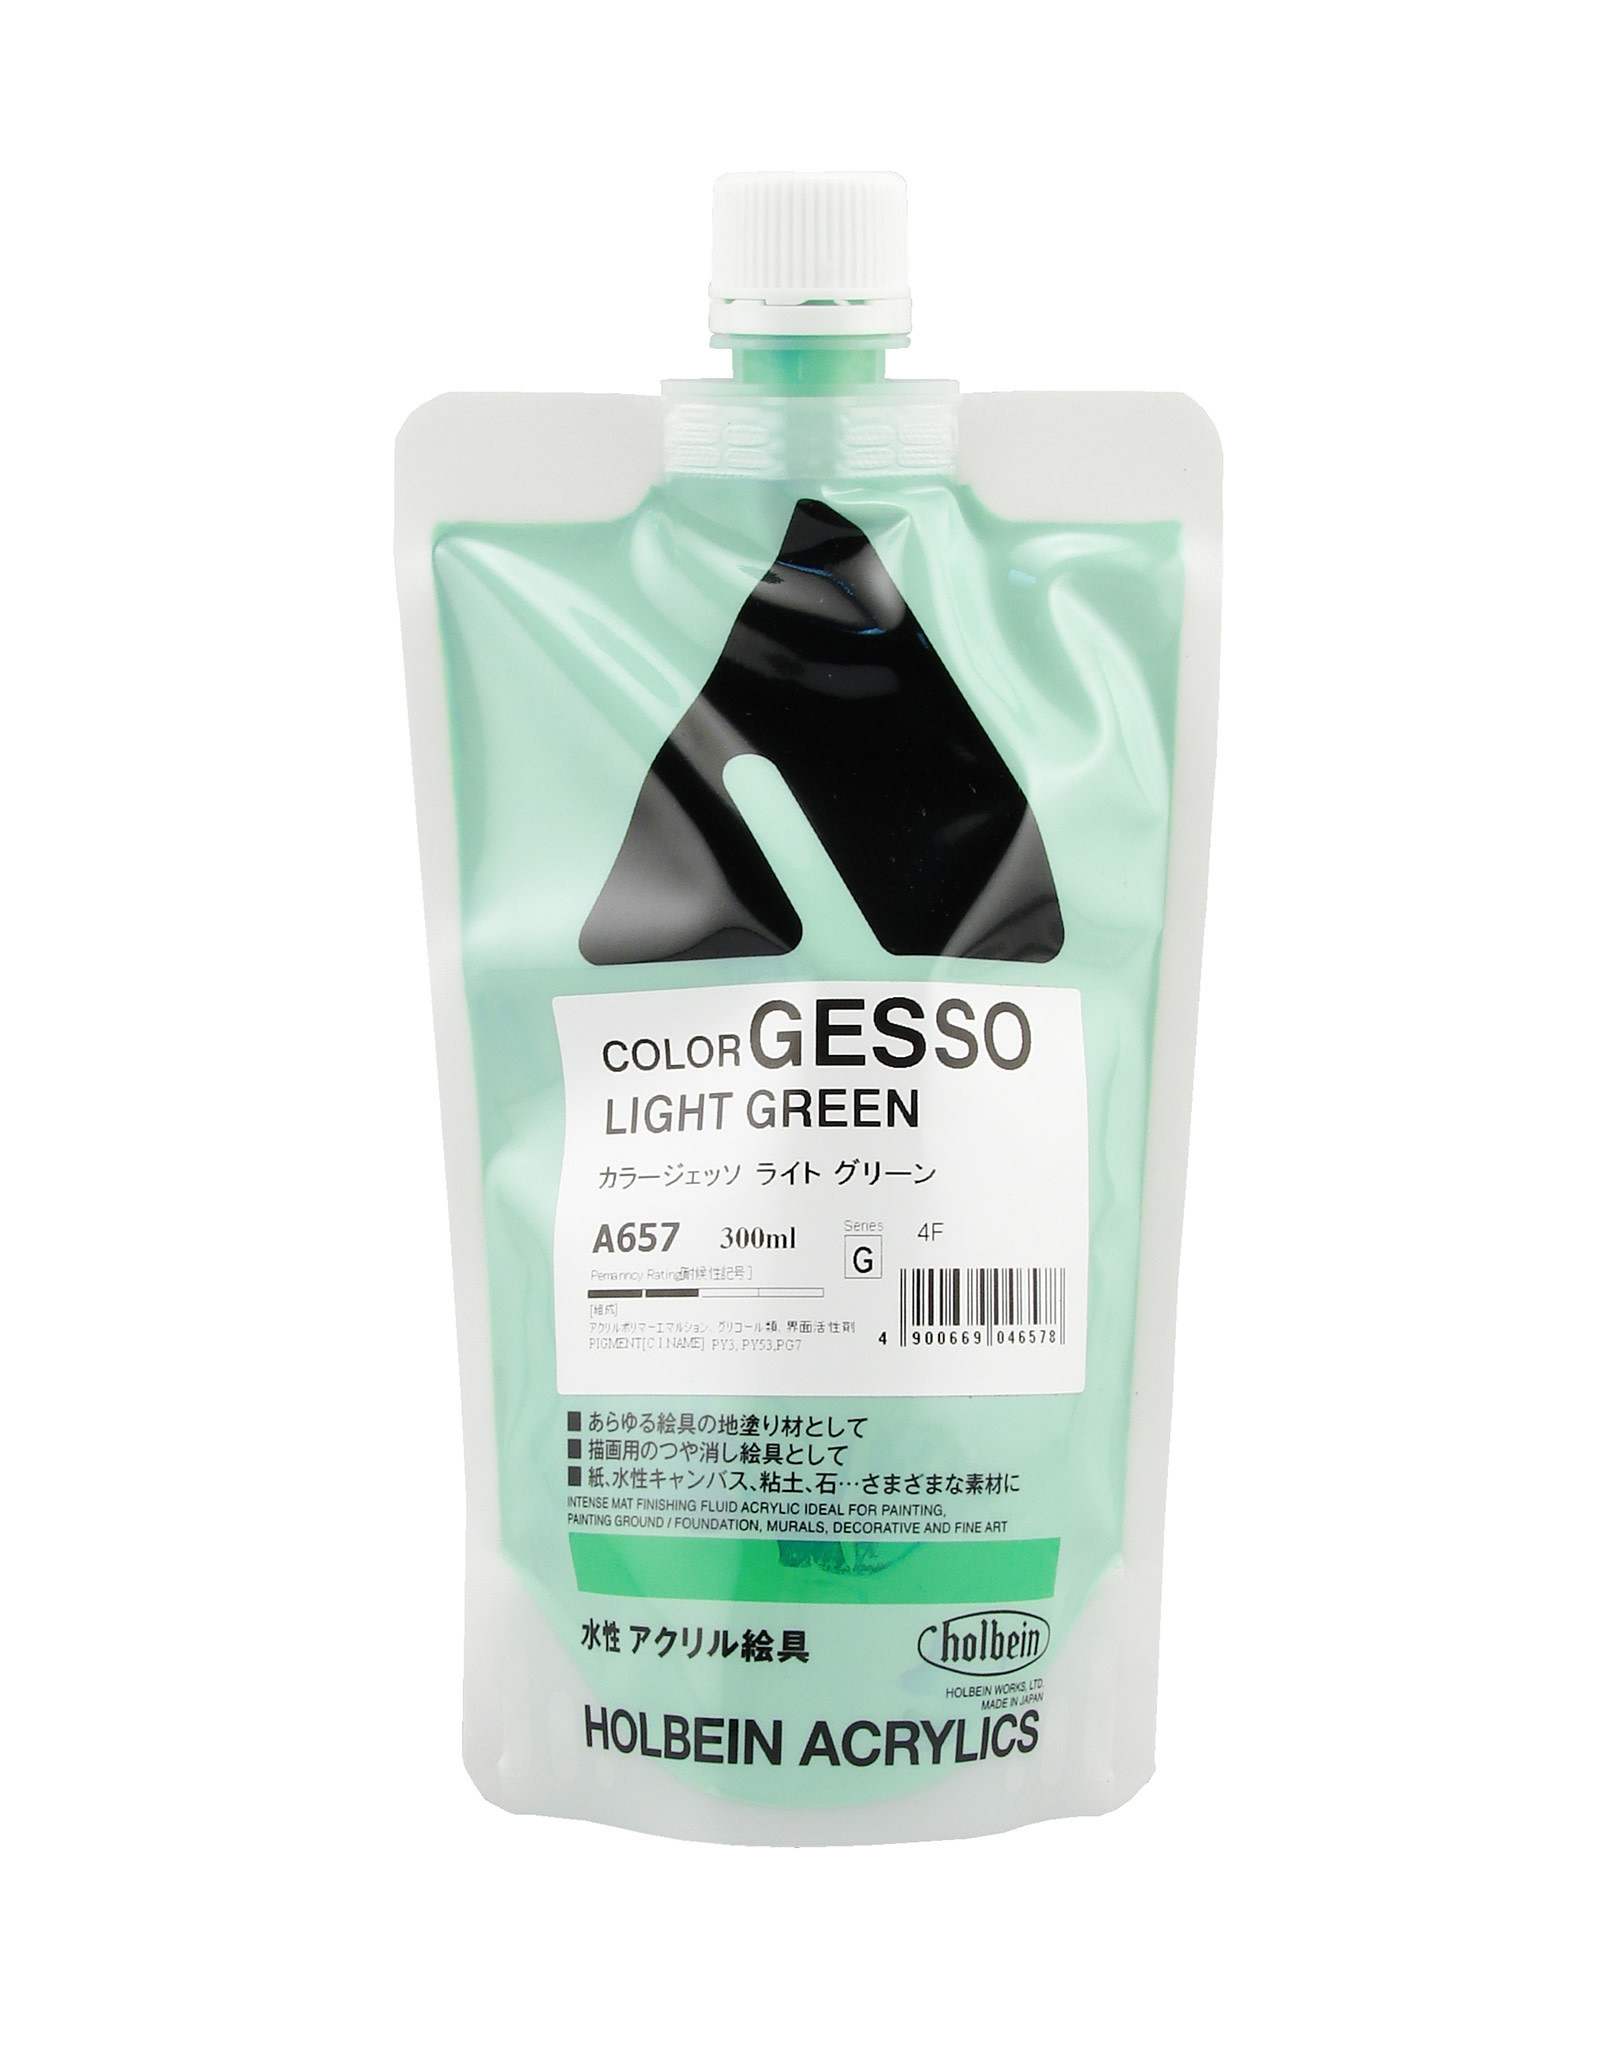 CLEARANCE Holbein GESSO Light Green 300ml bag